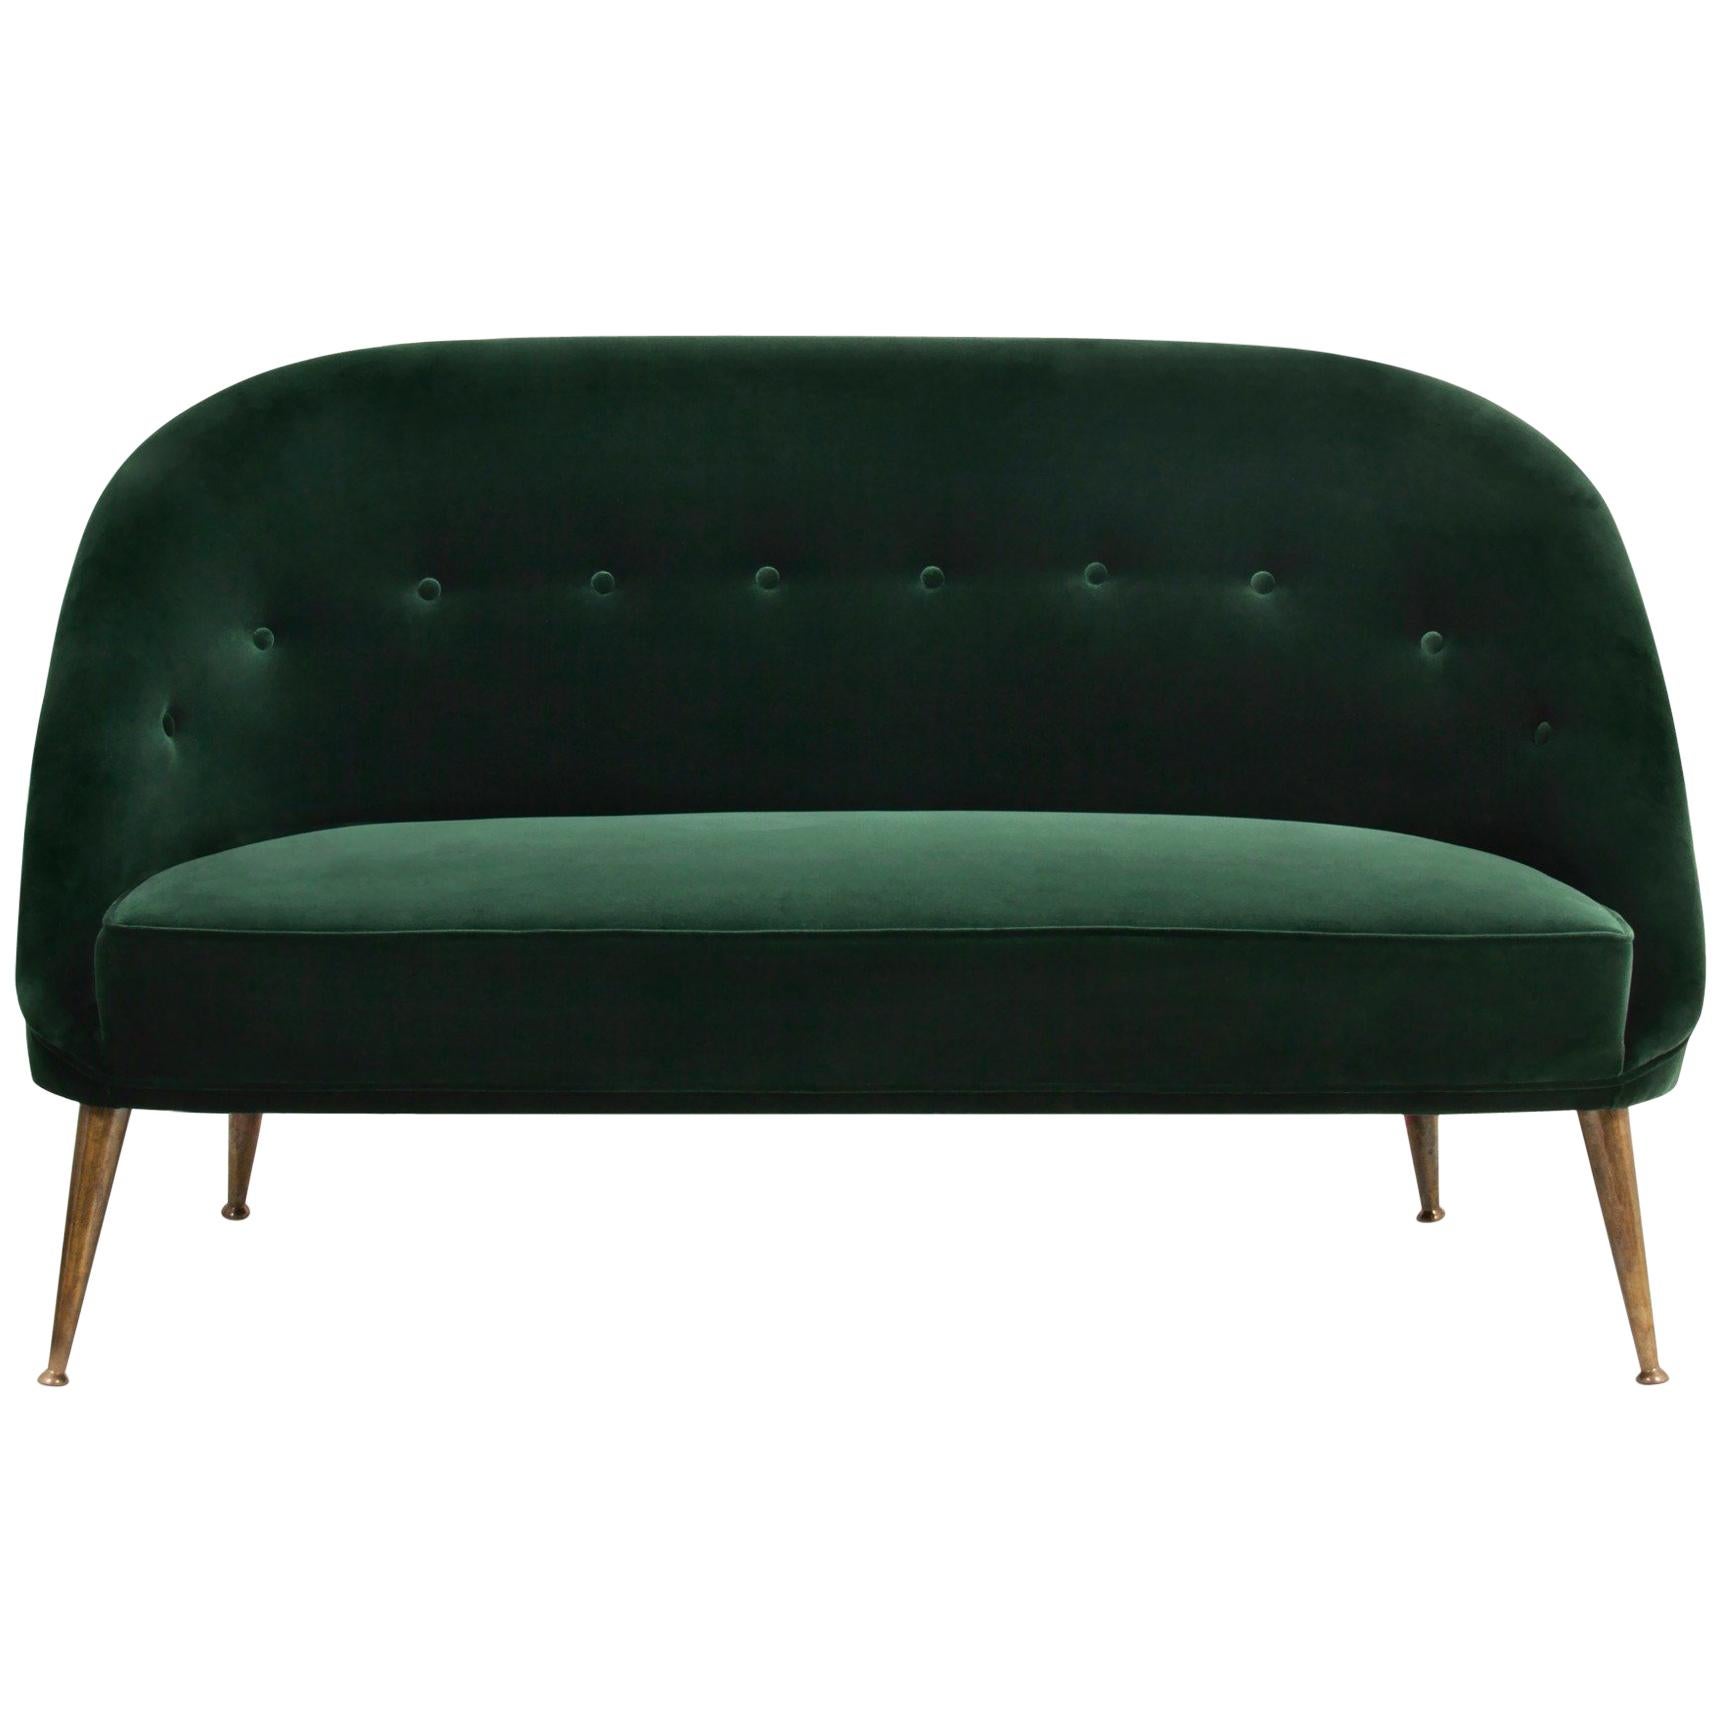 Malay 2 Seat Sofa in Cotton Velvet with Wood & Brass Legs For Sale